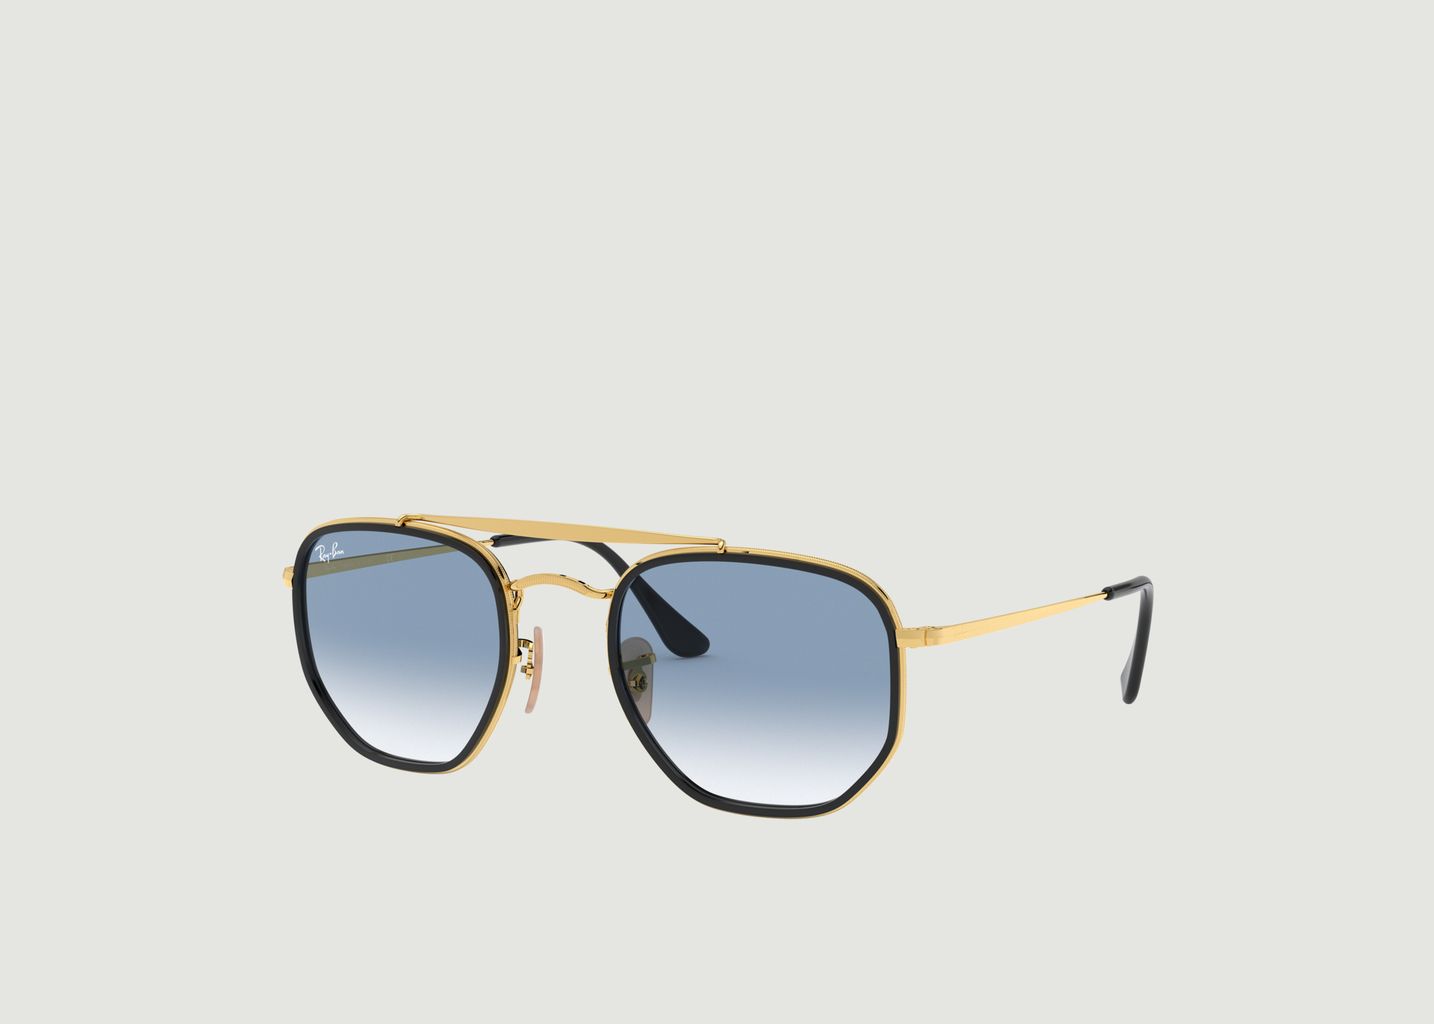 Die Marshall II-Sonnenbrille - Ray-Ban